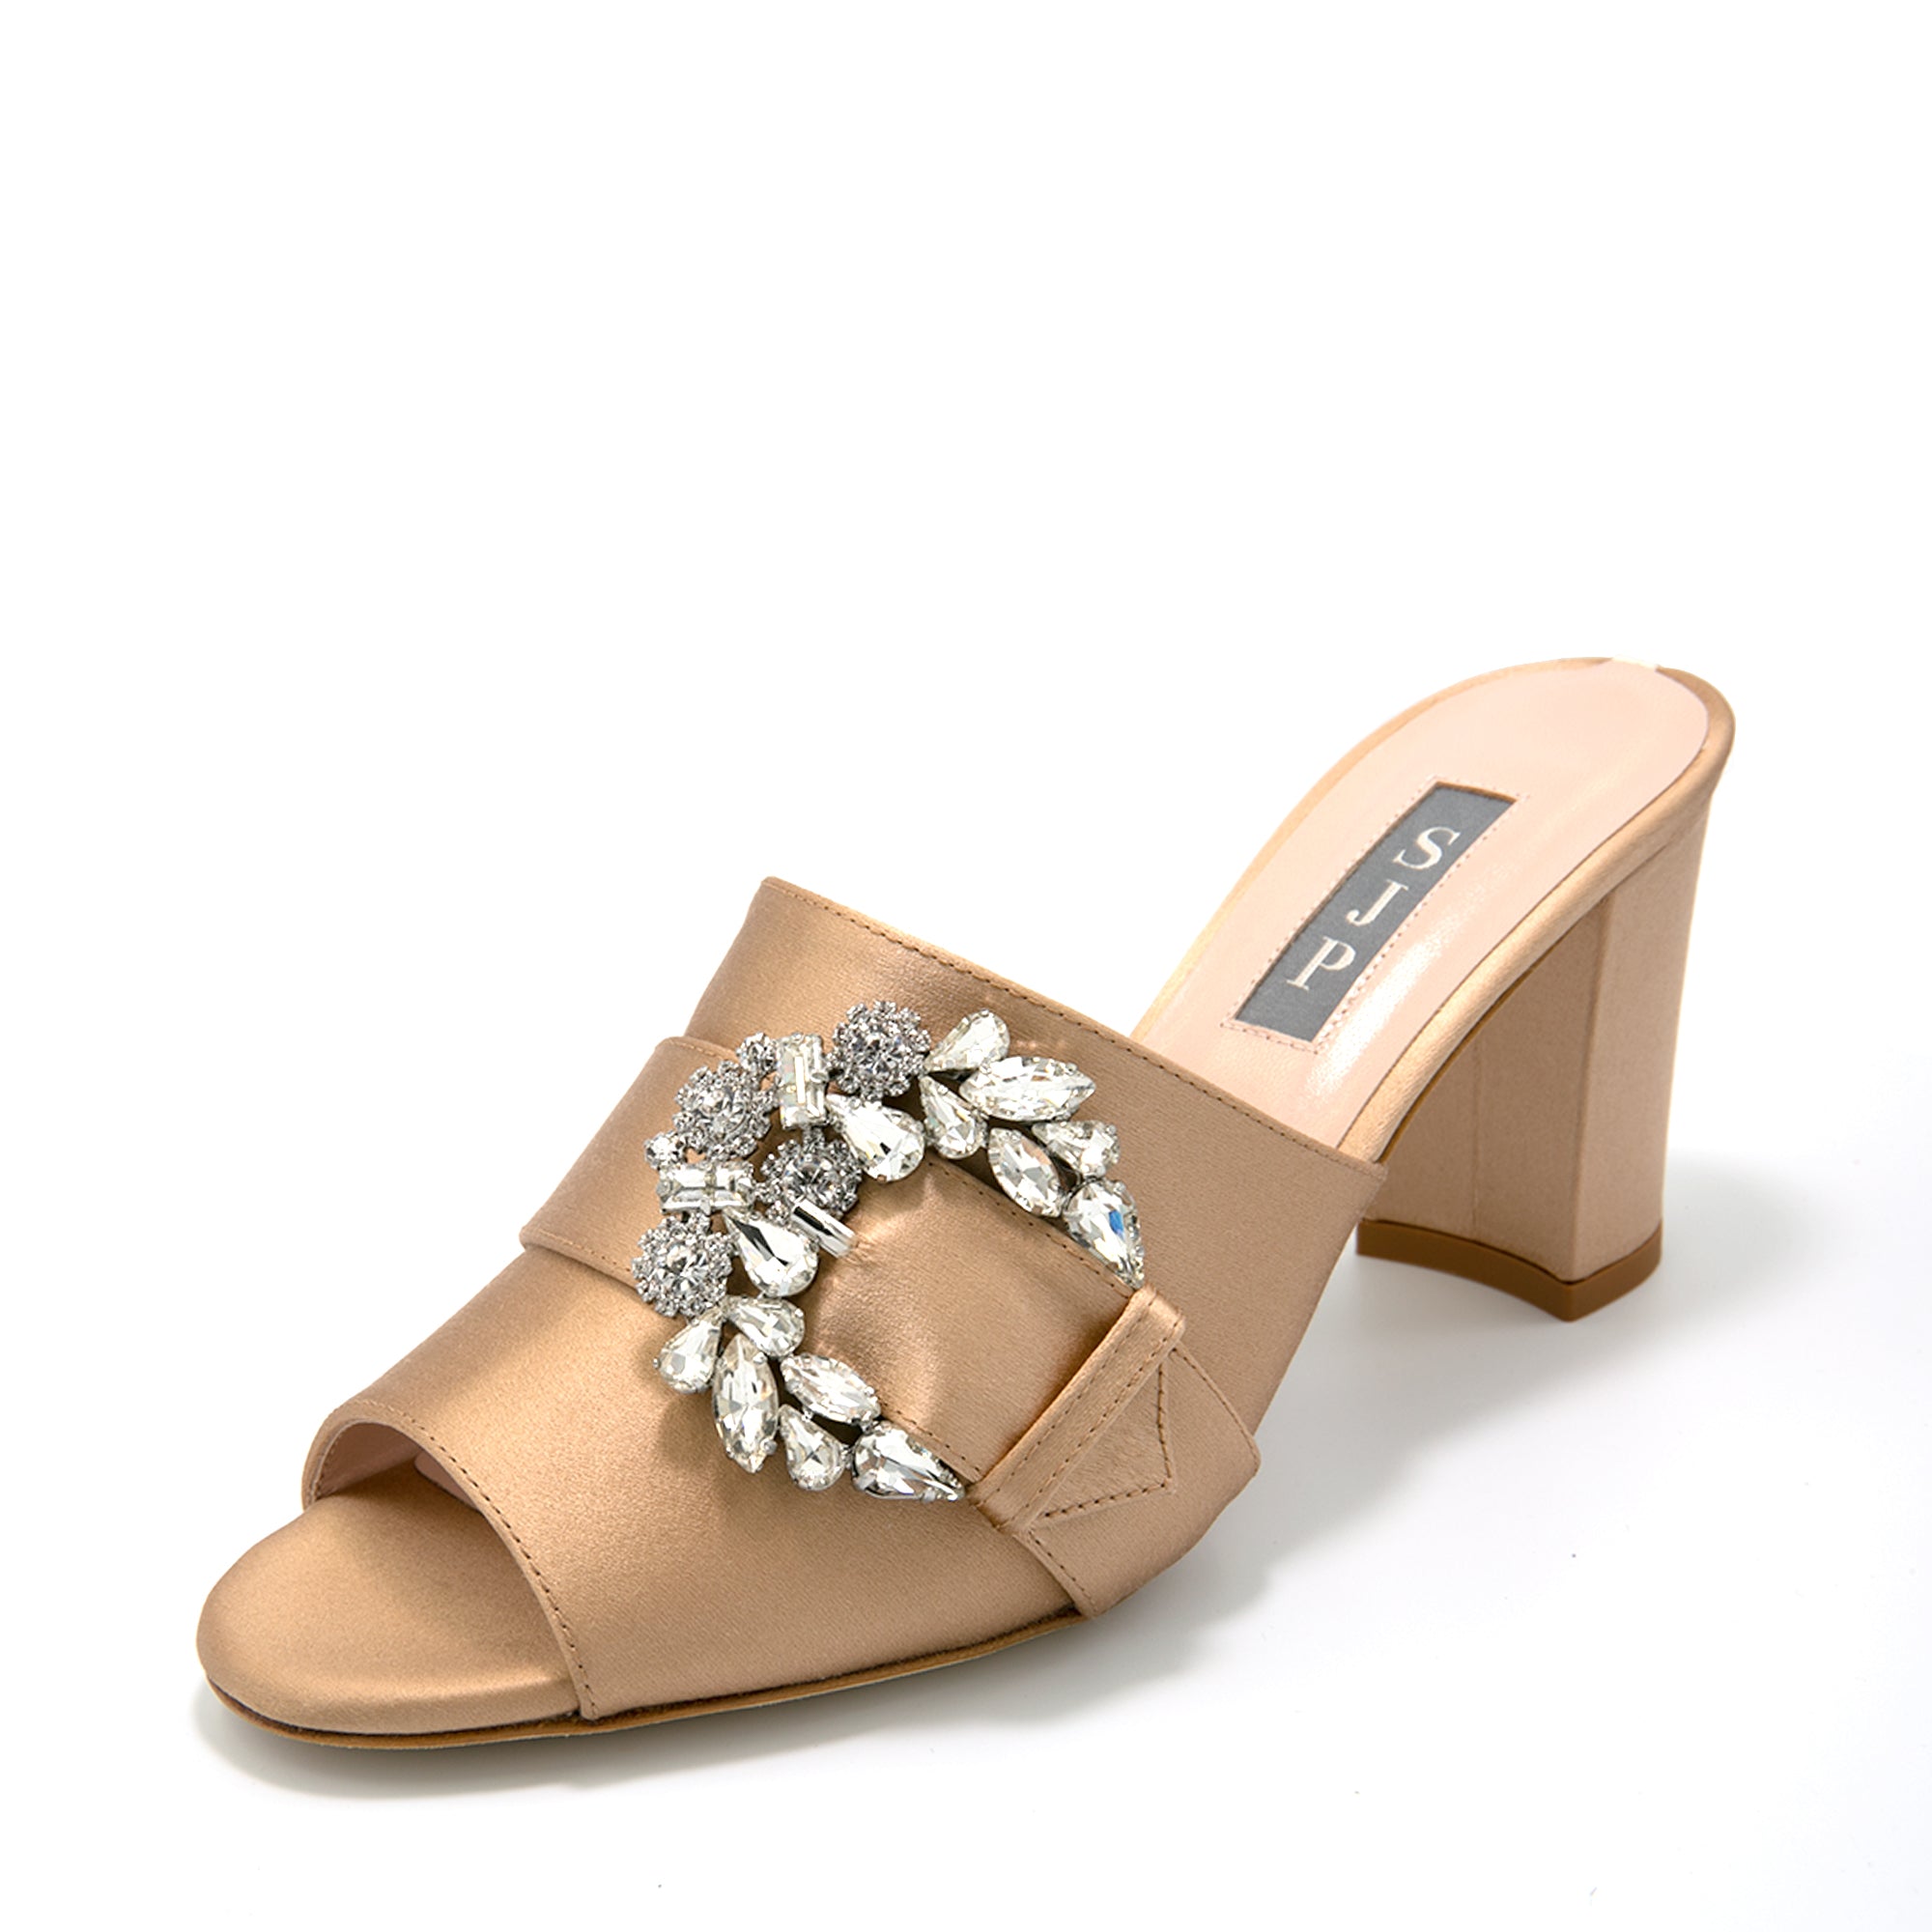 Sjp By Sarah Jessica Parker Tinker 70mm Nude Satin Mules